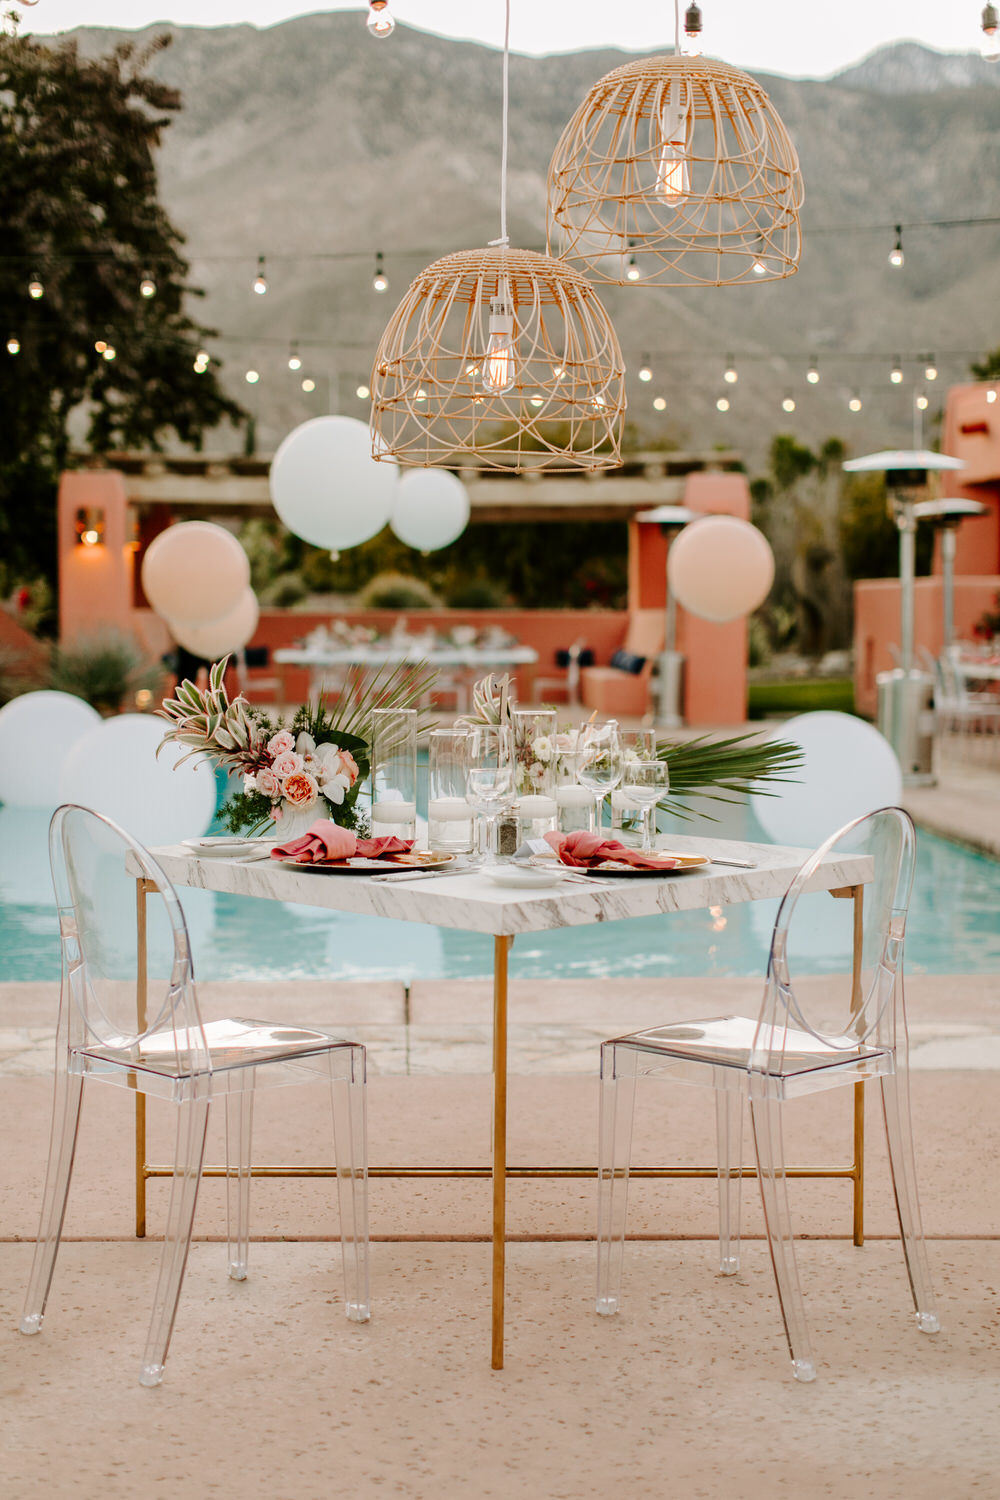 sweetheart table with ghost chairs, marble table and pink tropical accents